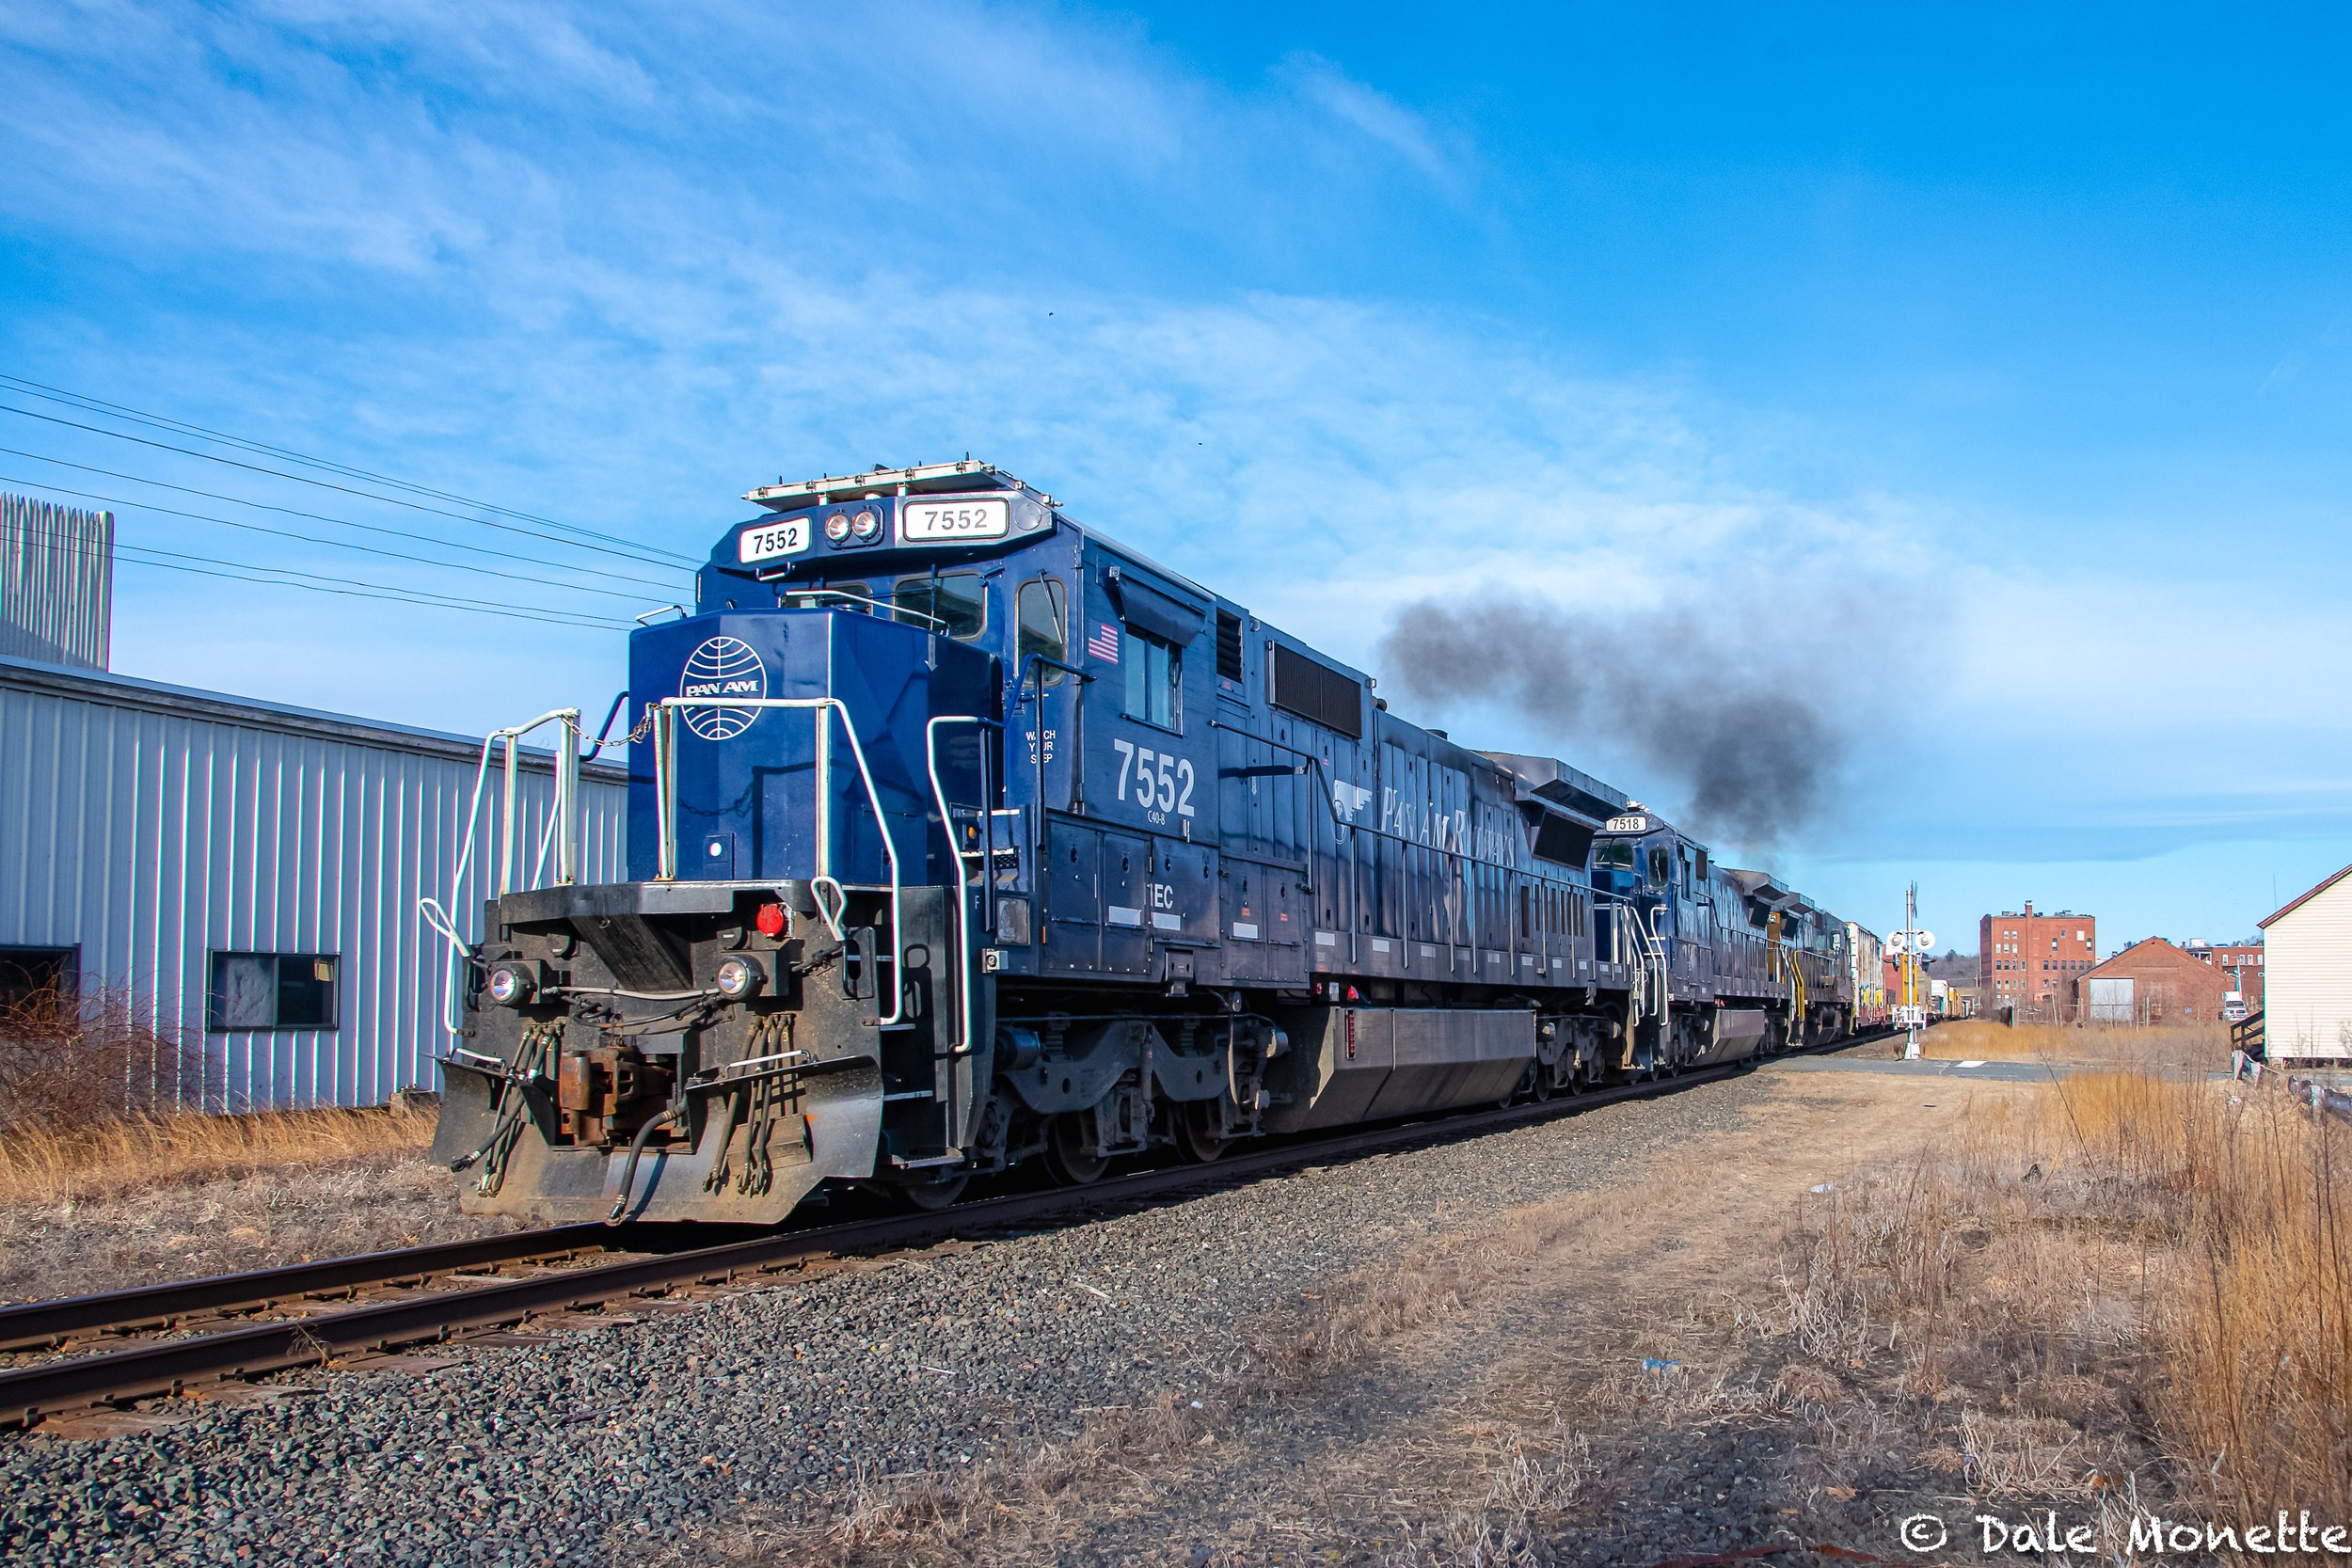   East Deerfield to Portland Pan Am freight train thru Orange MA belching out smoke from its 5 diesels on a 20 F degree late March Tuesday.  